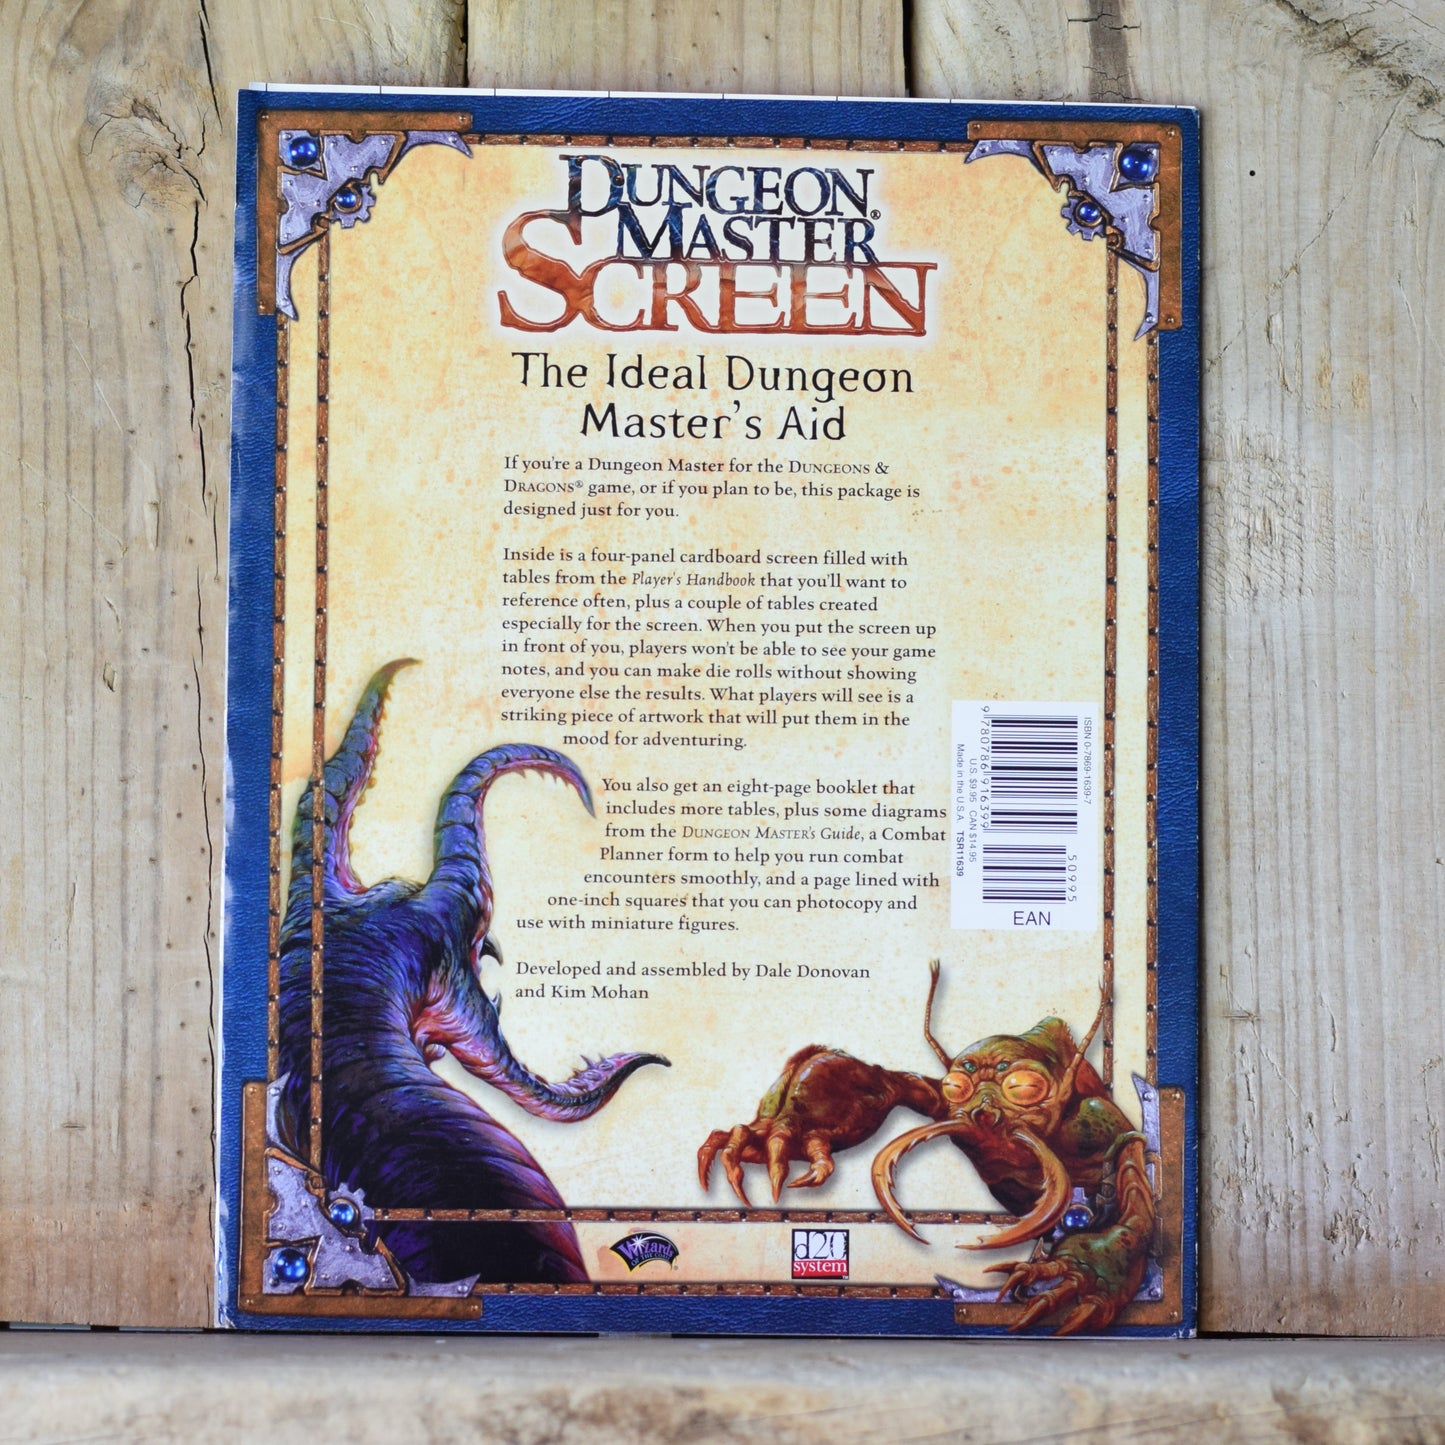 Dungeons and Dragons 3e RPG Books: Heart of Nightfang Spire, The Forge of Fury and DM Screen